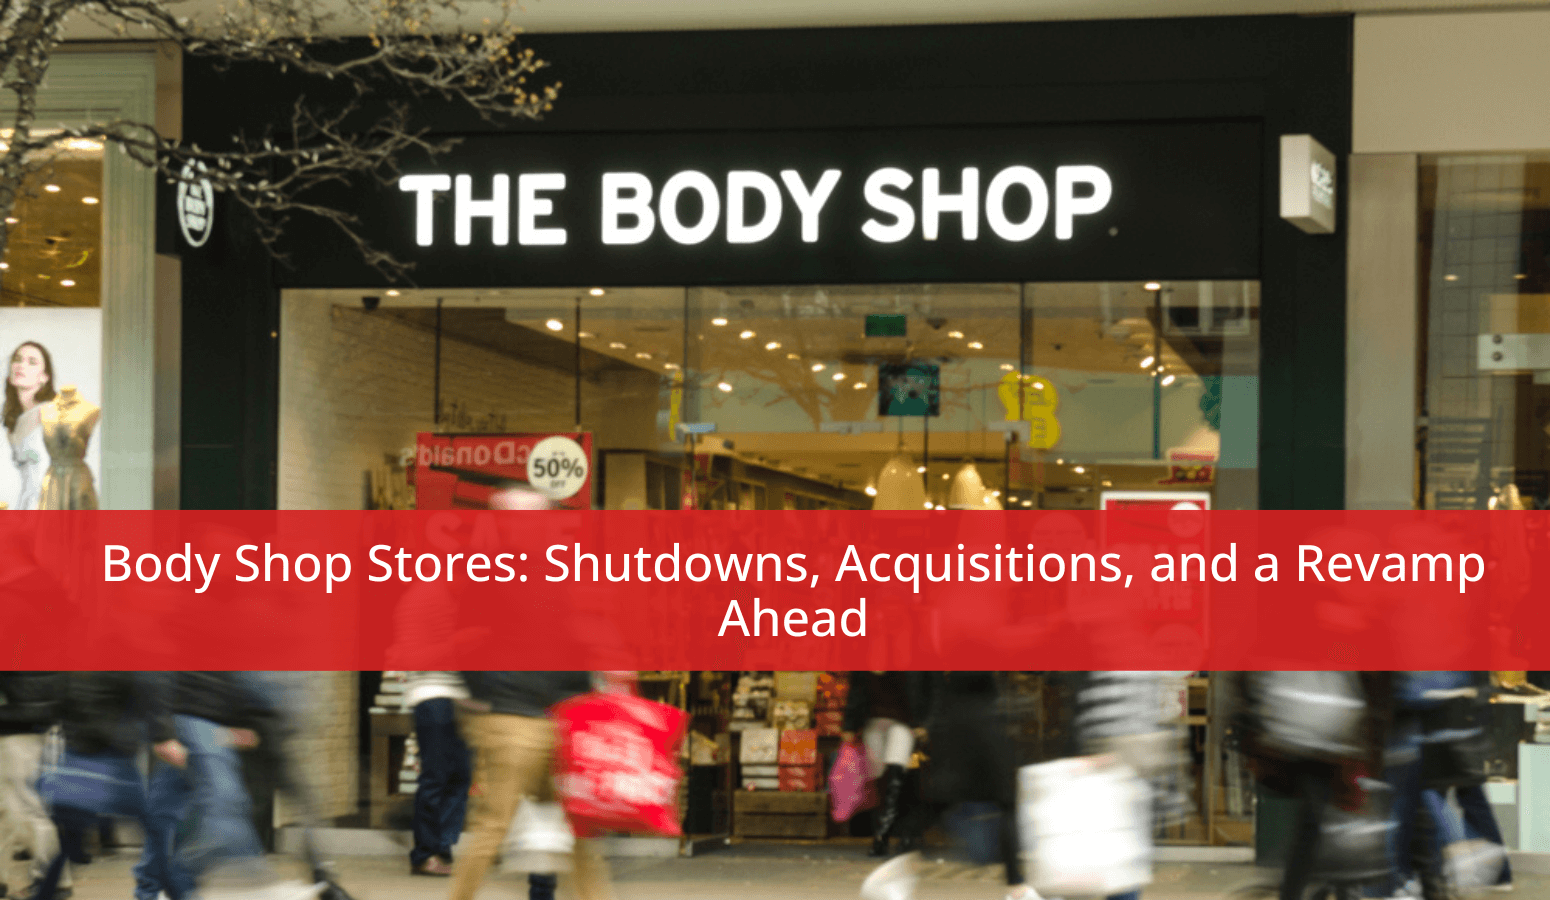 Featured image for “Body Shop Stores: Shutdowns, Acquisitions, and a Revamp Ahead”